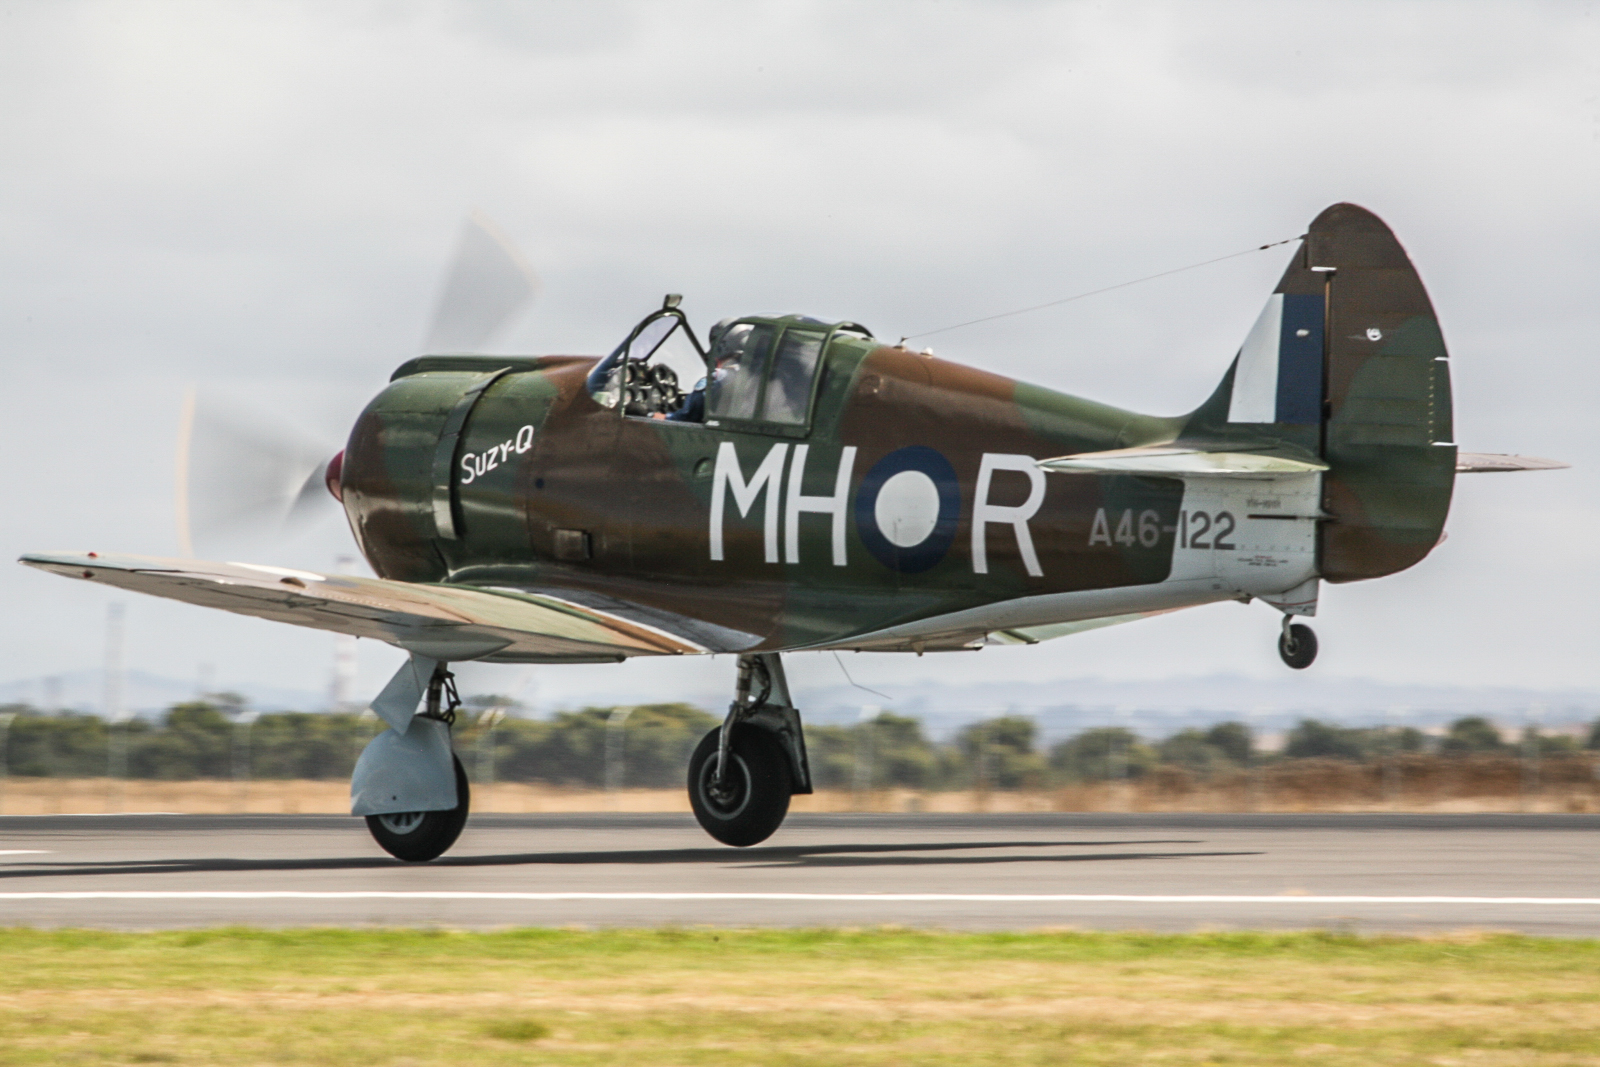 The Temora Aviation Museum's magnificent Boomerang A46-122, restored by Matt Denning, taking off for a flight in recent years. (photo by Phil Buckley)